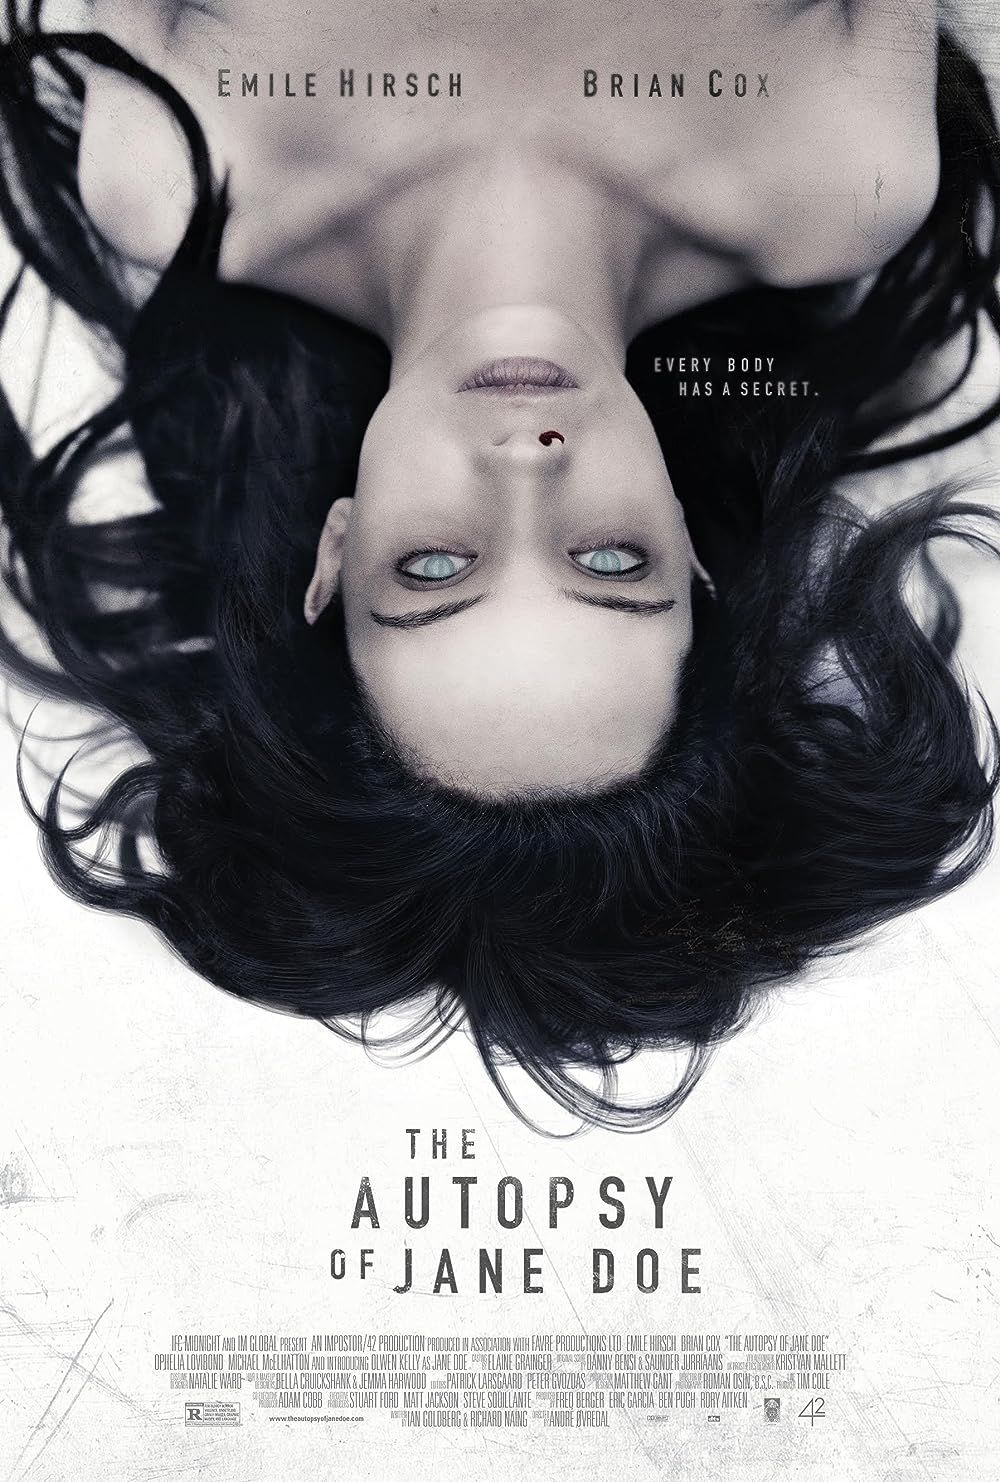 Olwen Catherine Kelly as a corpse on the poster of The Autopsy of Jane Doe